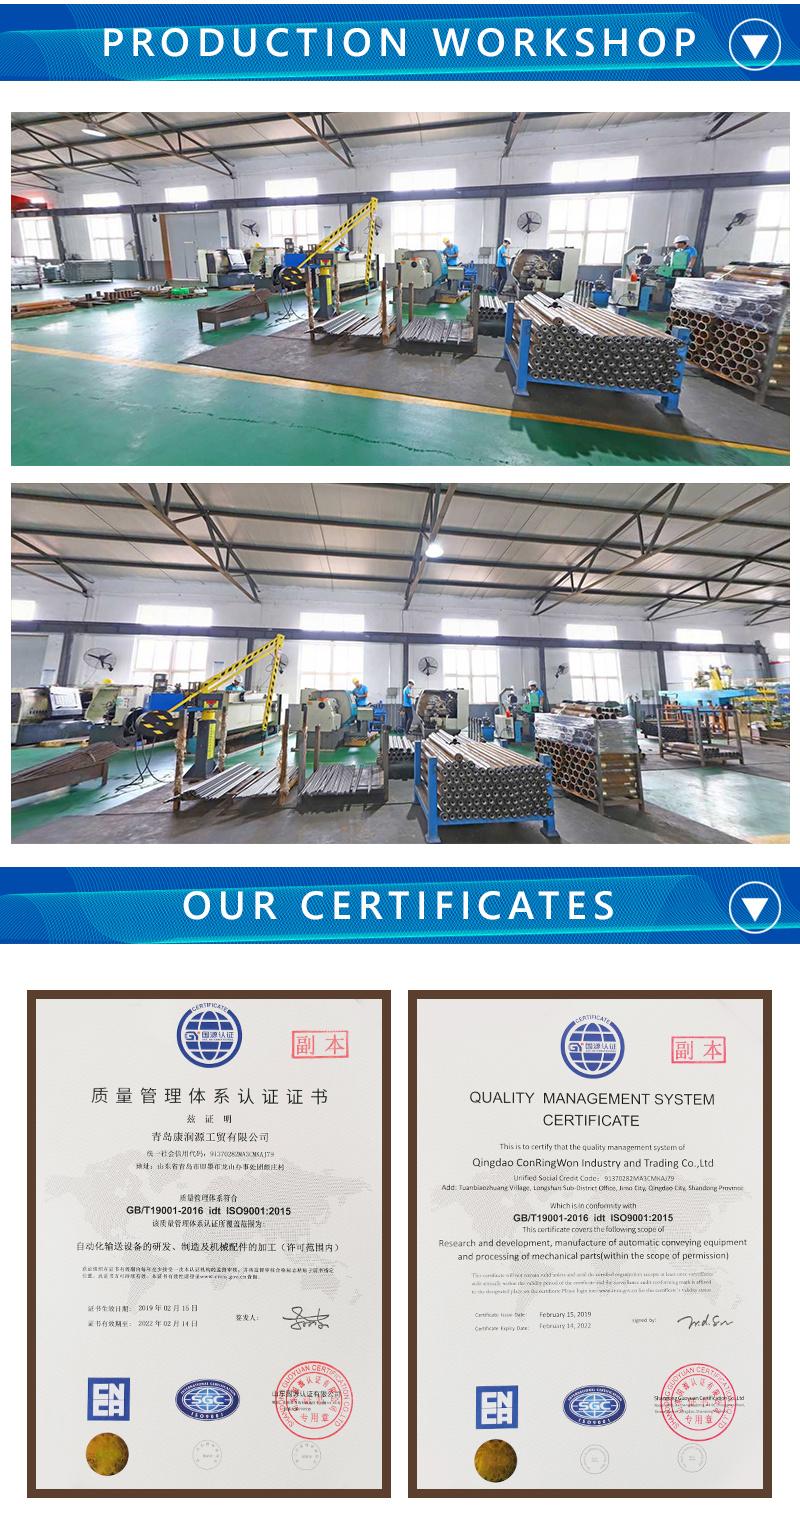 OEM High Quality Thickness Conveyor Stainless Conveyor Belt Rollers